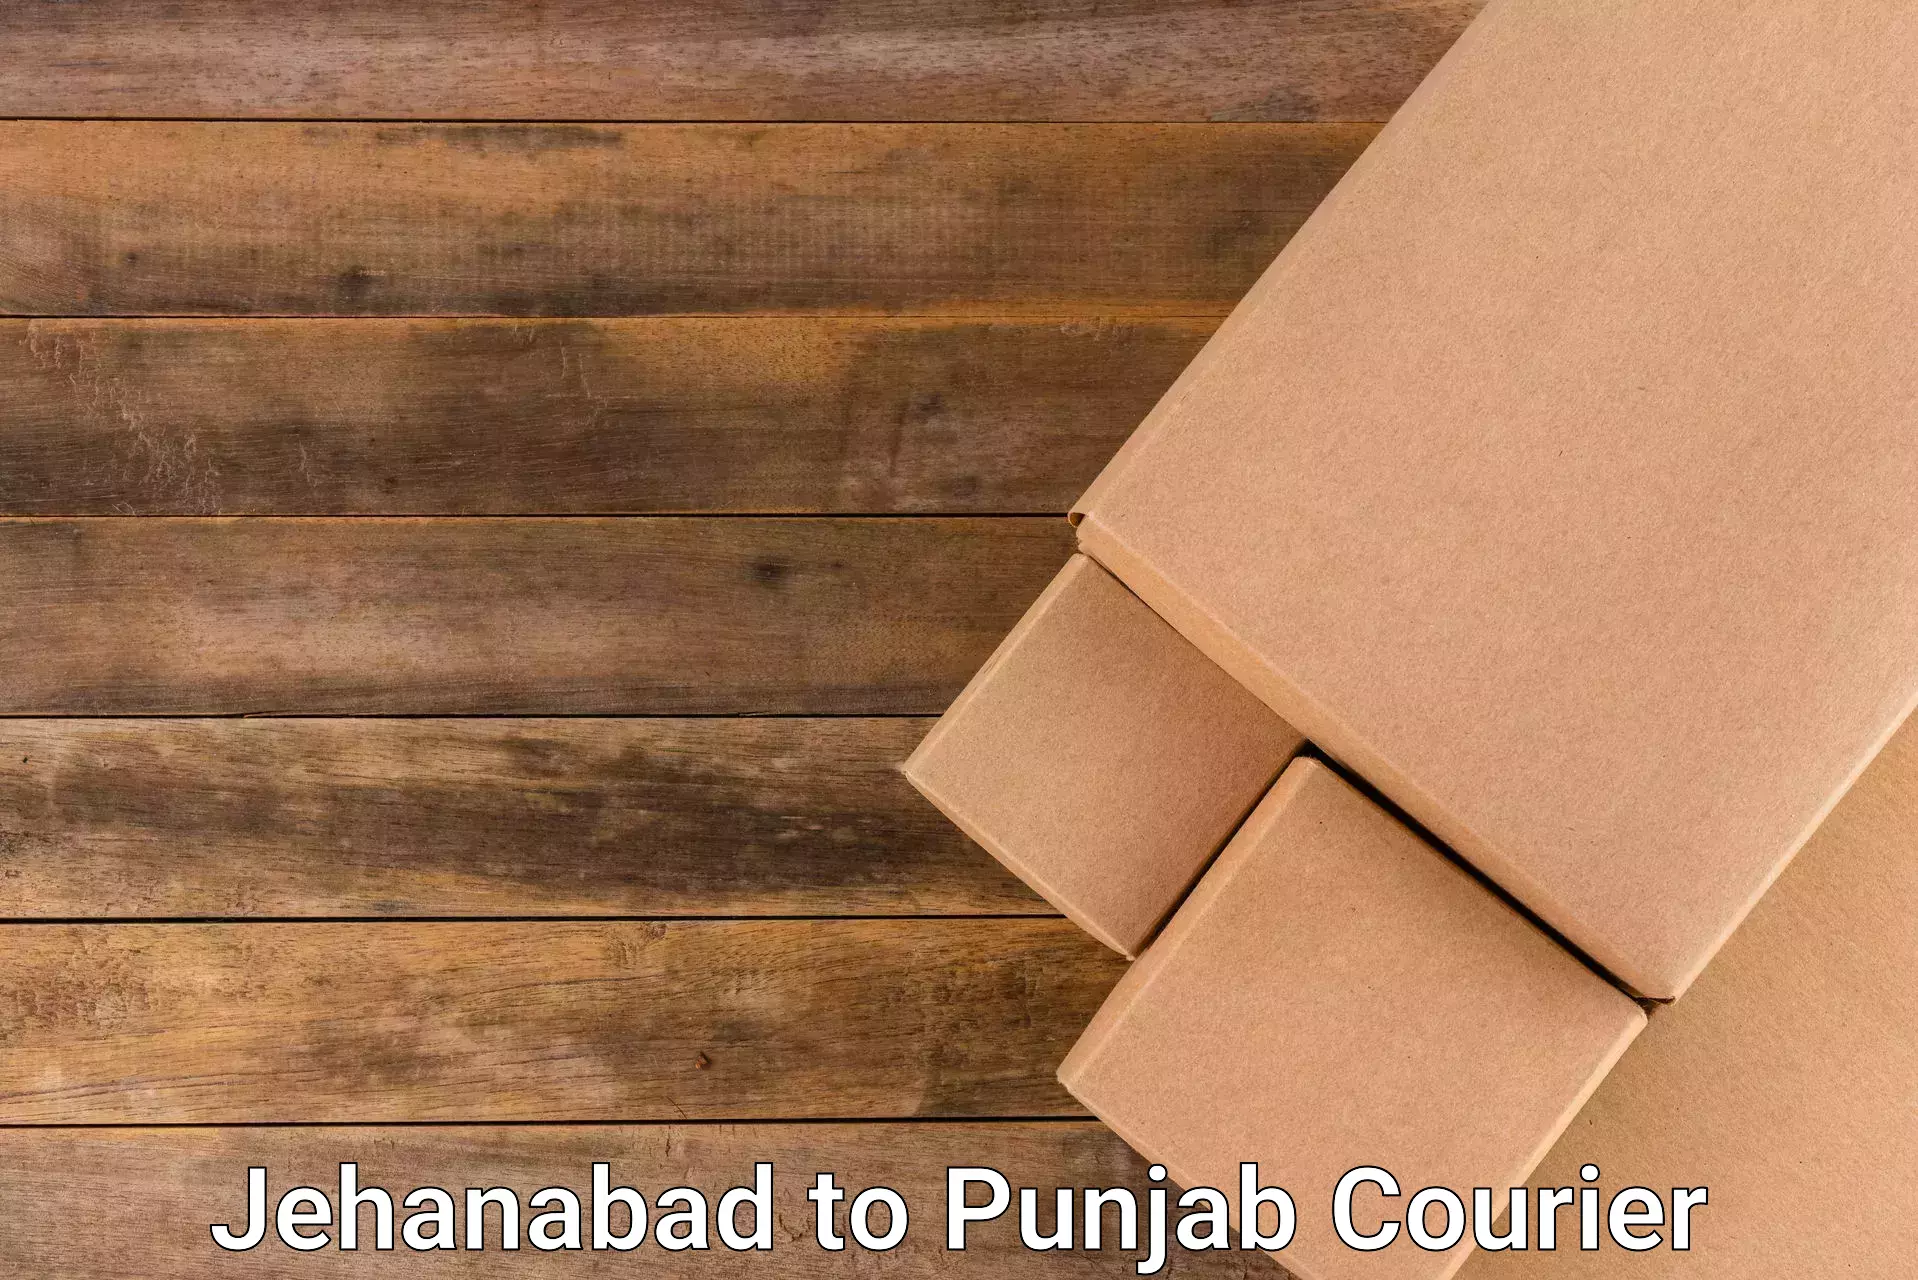 Enhanced tracking features Jehanabad to Punjab